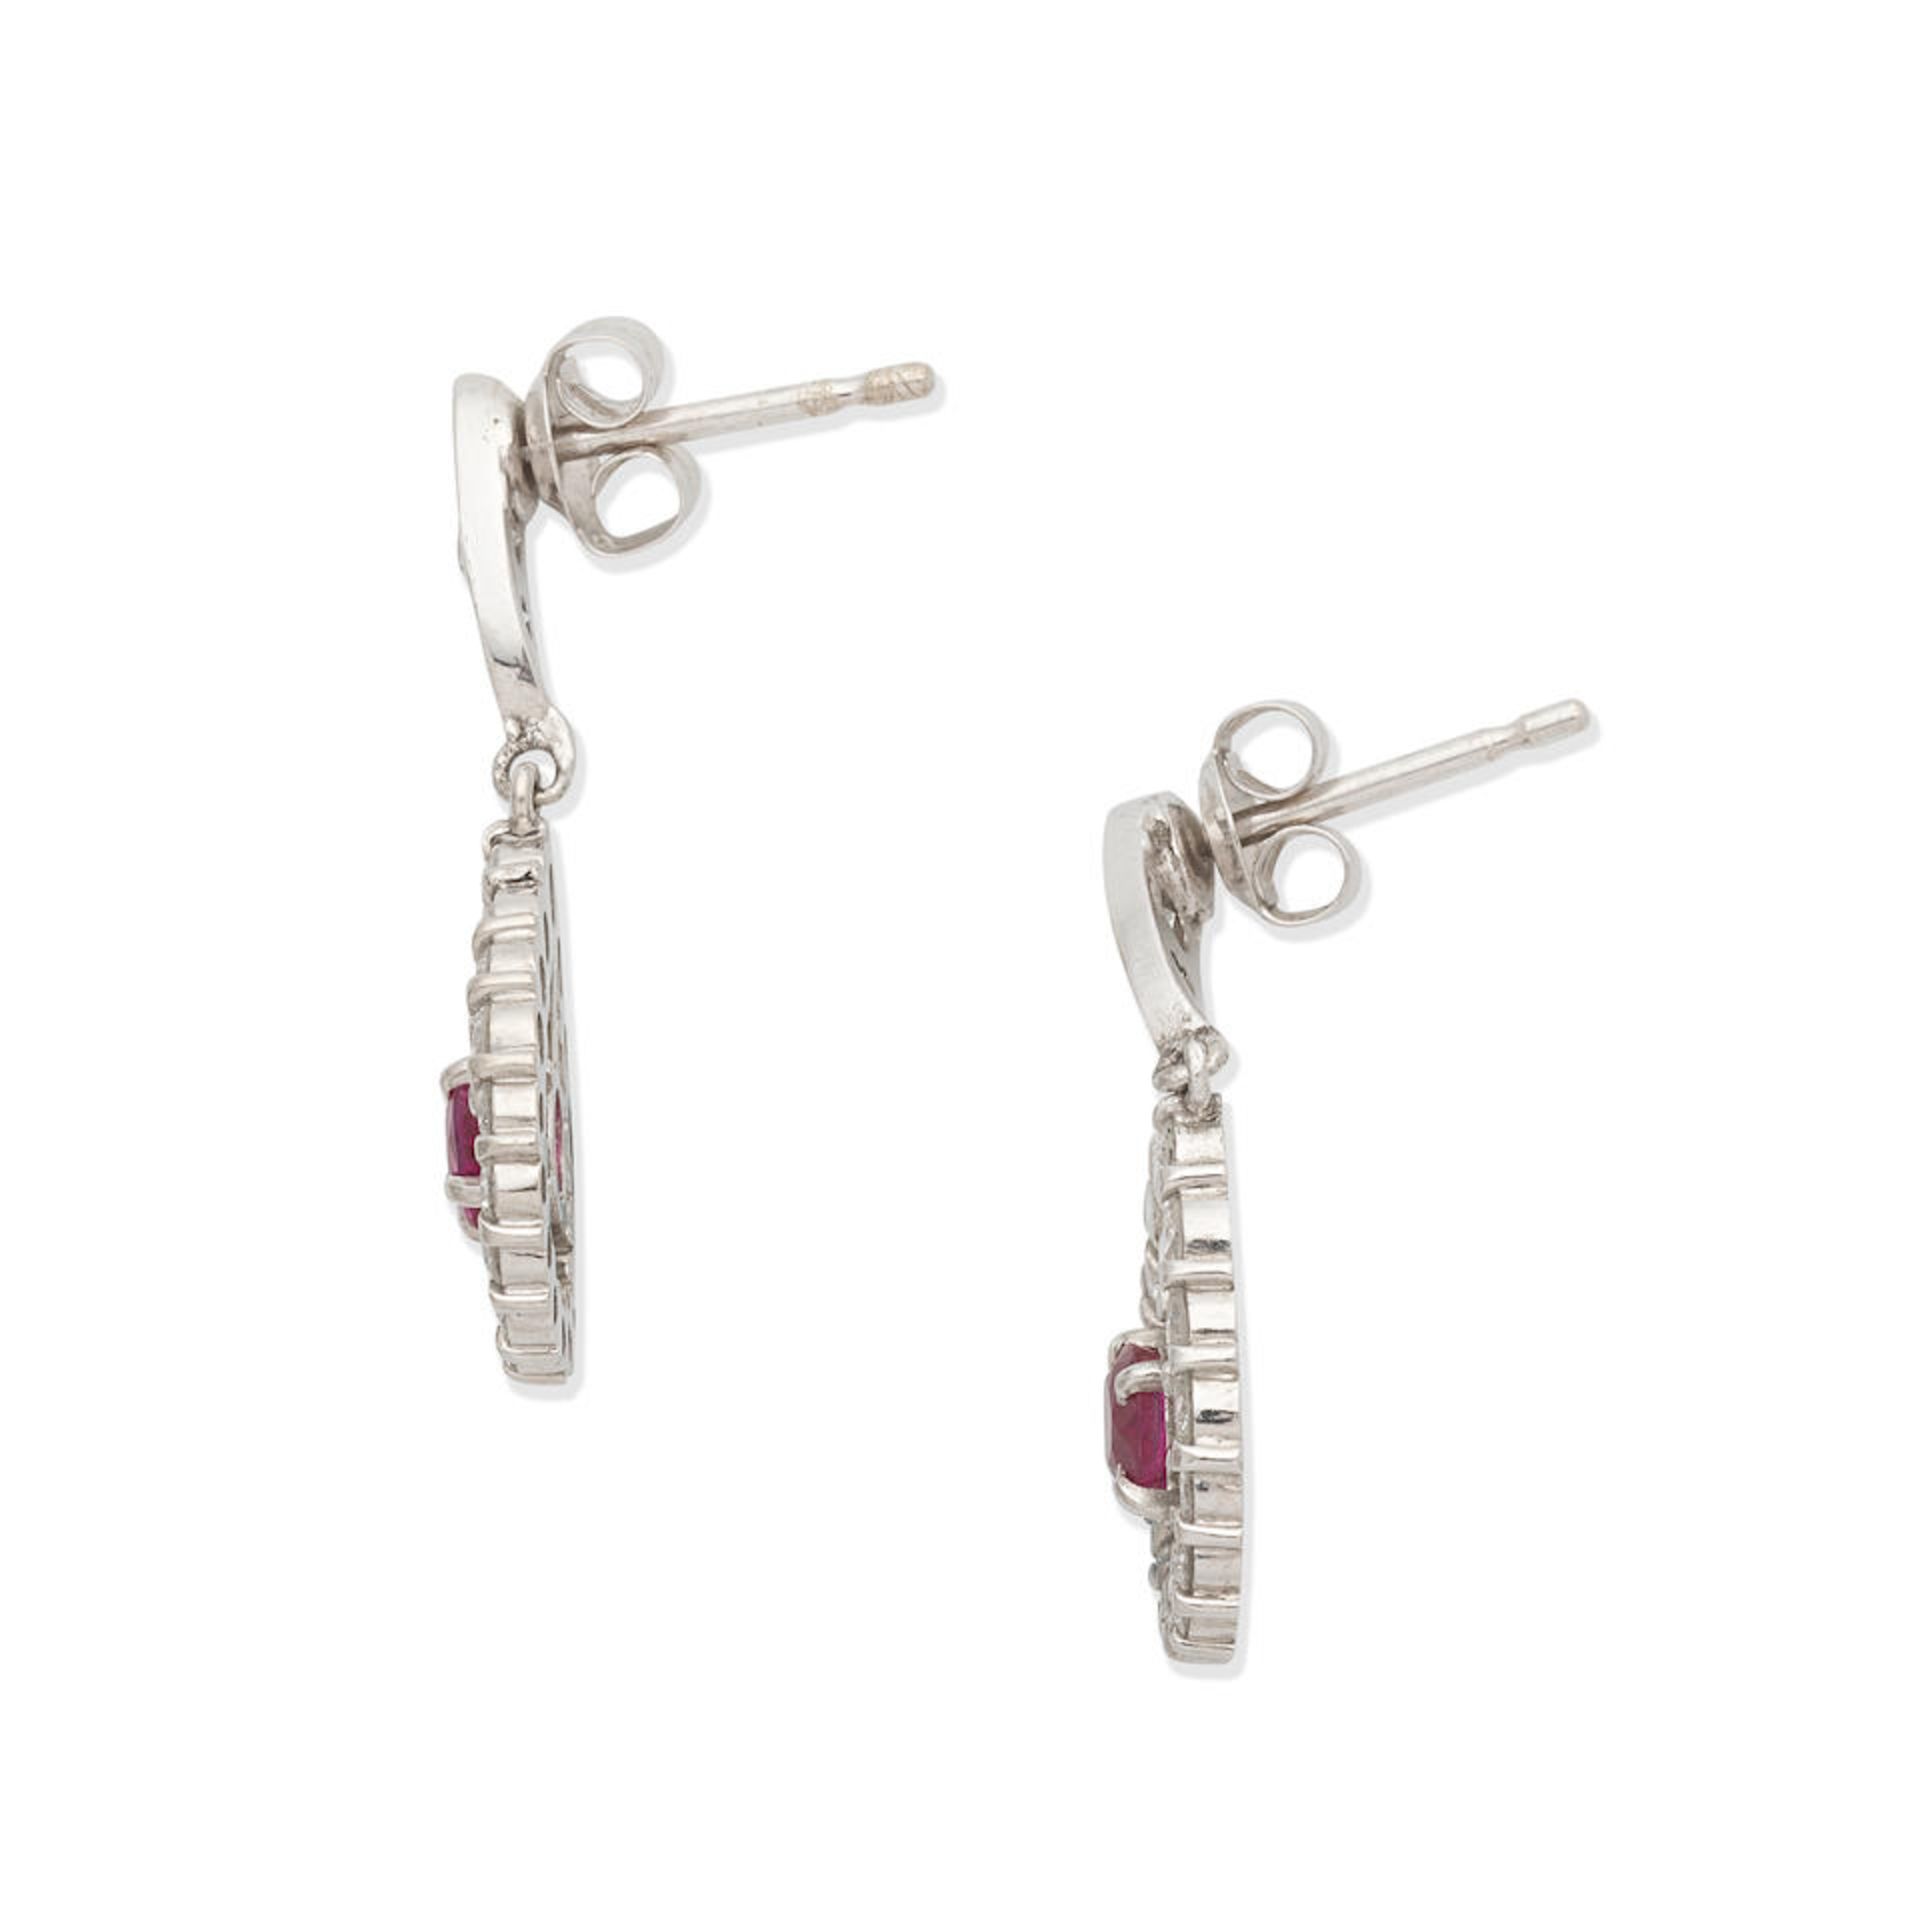 RUBY AND DIAMOND EARRINGS - Image 3 of 3